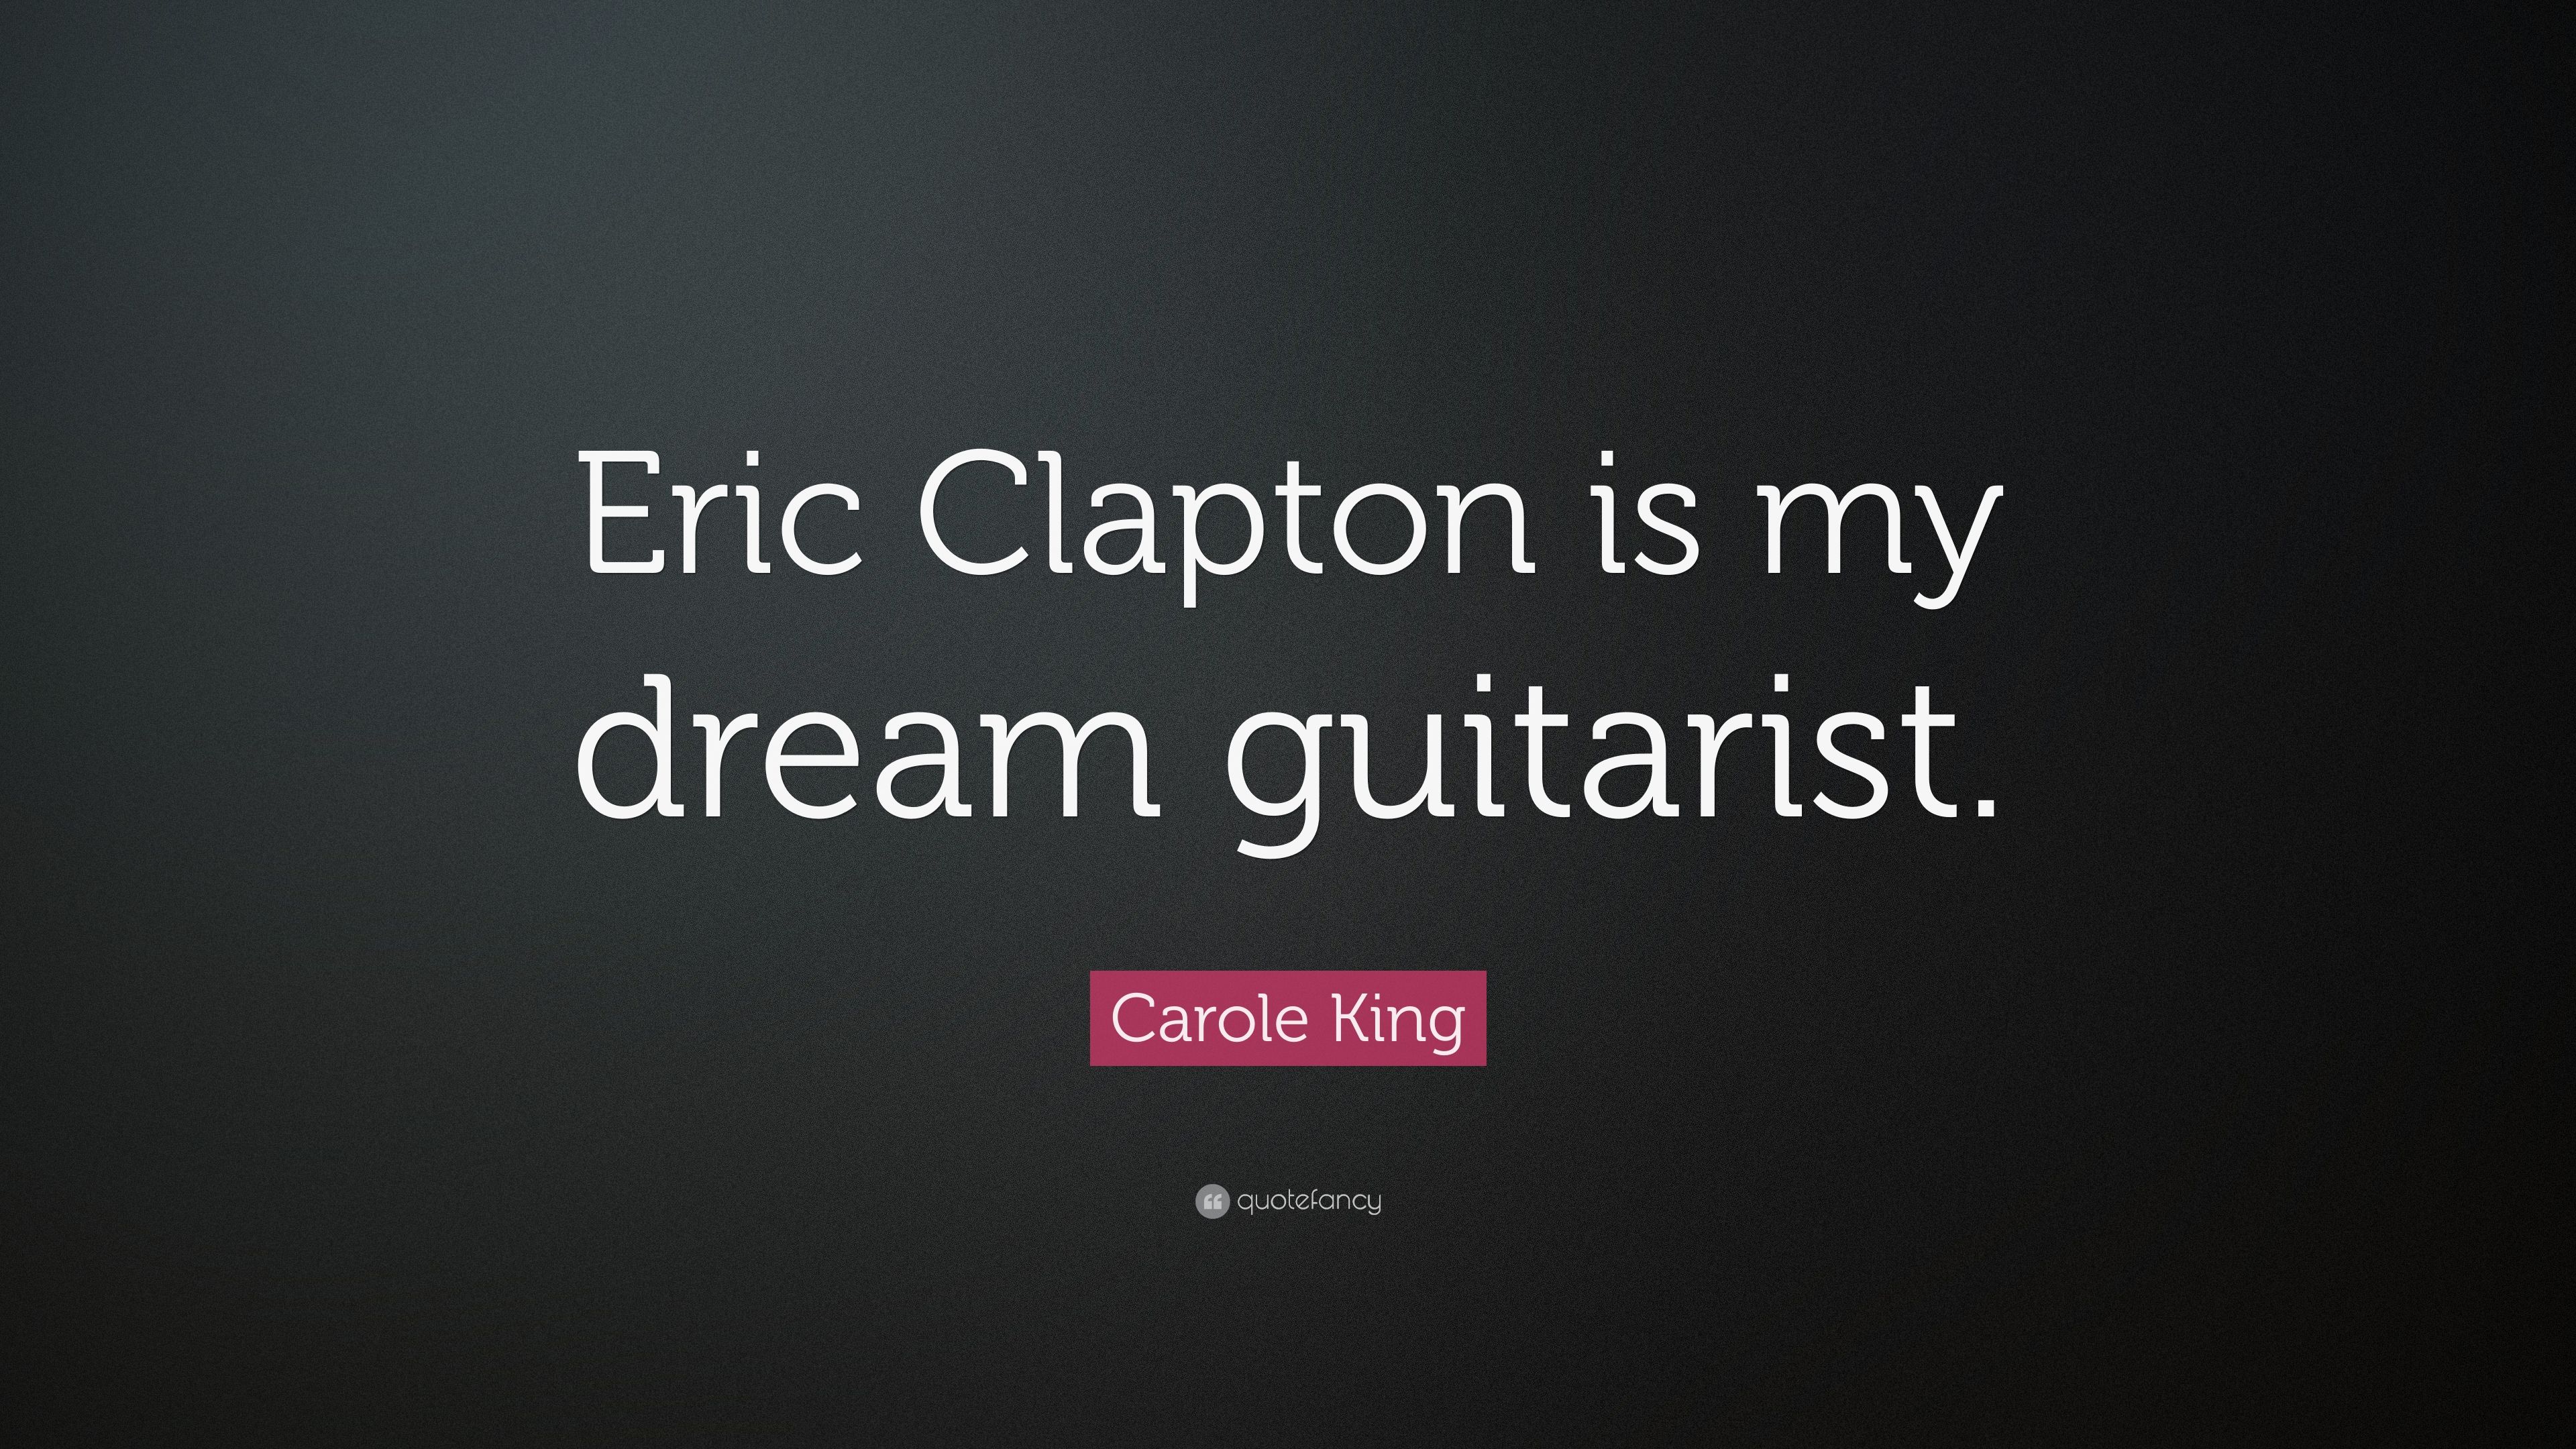 Carole King Quote: “Eric Clapton is my dream guitarist.” 7